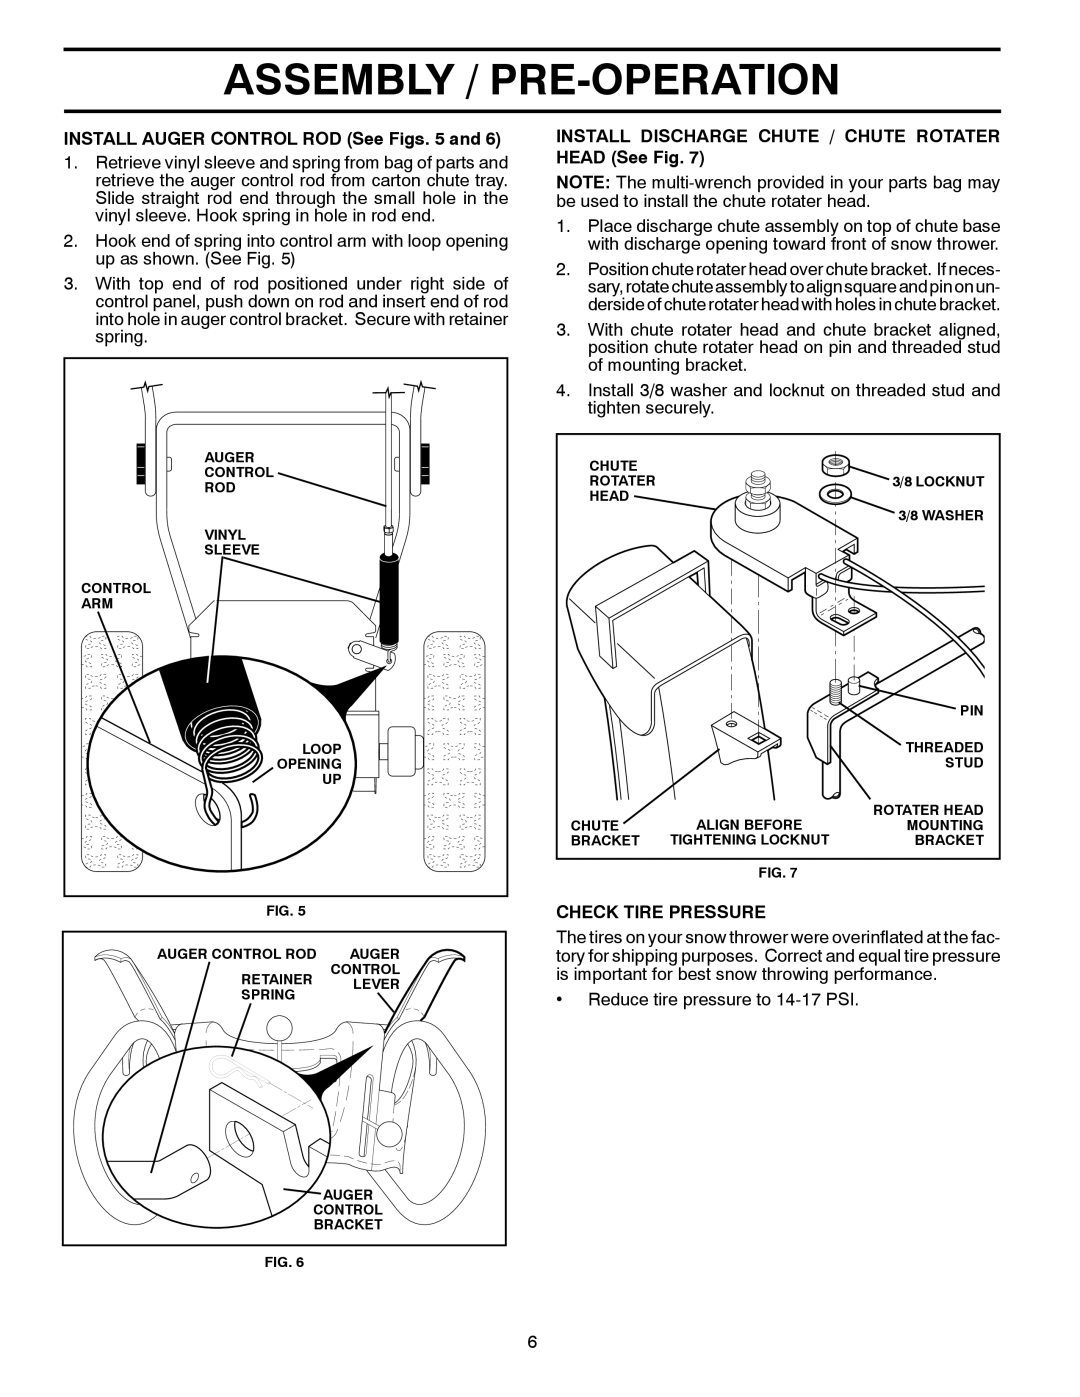 Poulan 430005, 96192002801 Assembly / Pre-Operation, INSTALL AUGER CONTROL ROD See Figs. 5 and, Check Tire Pressure 